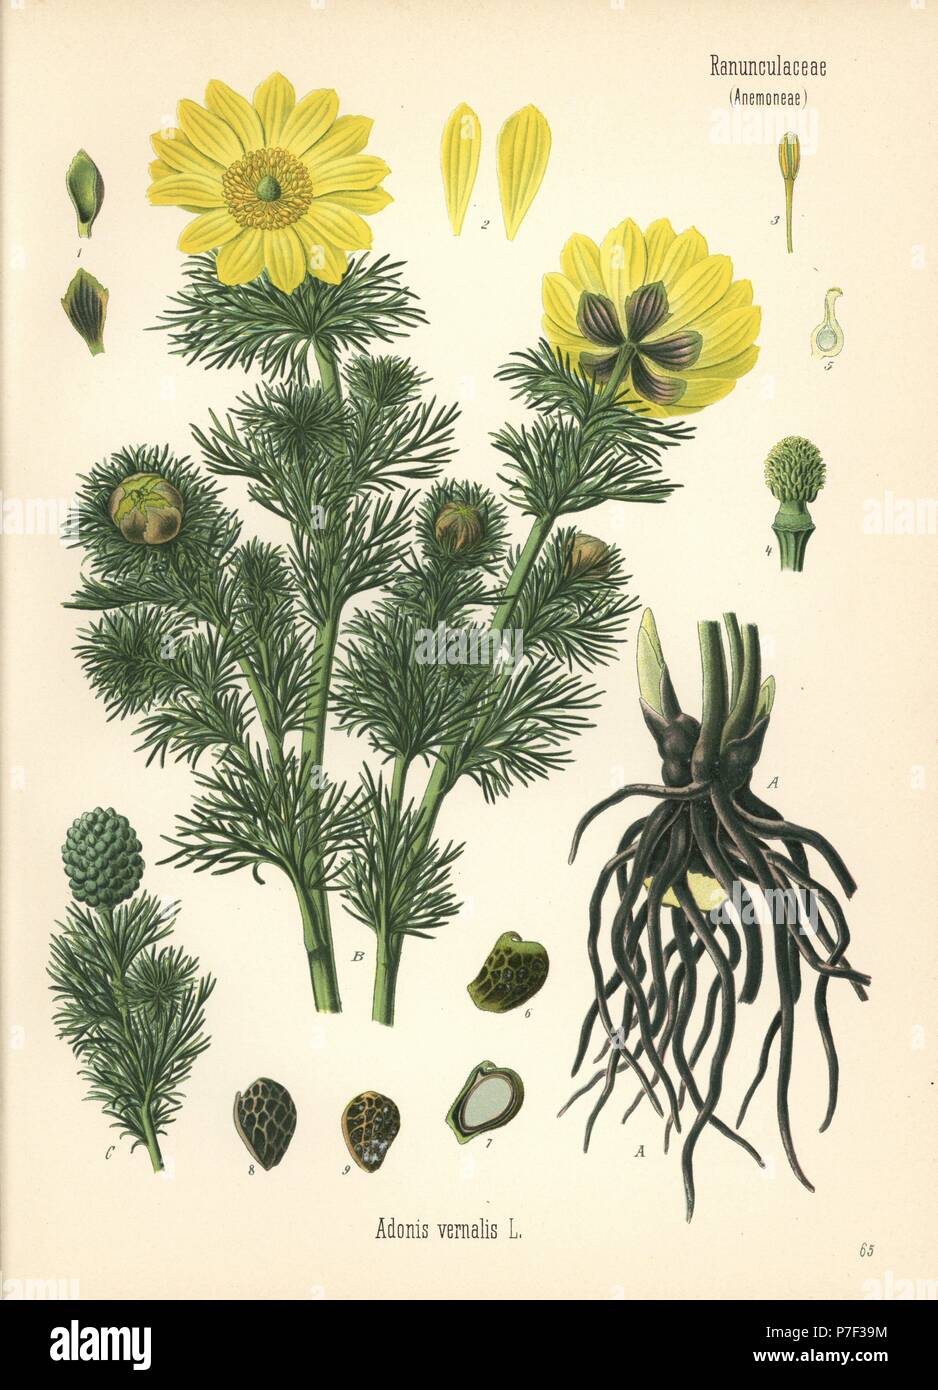 Spring pheasant's eye, Adonis vernalis. Chromolithograph after a botanical illustration from Hermann Adolph Koehler's Medicinal Plants, edited by Gustav Pabst, Koehler, Germany, 1887. Stock Photo